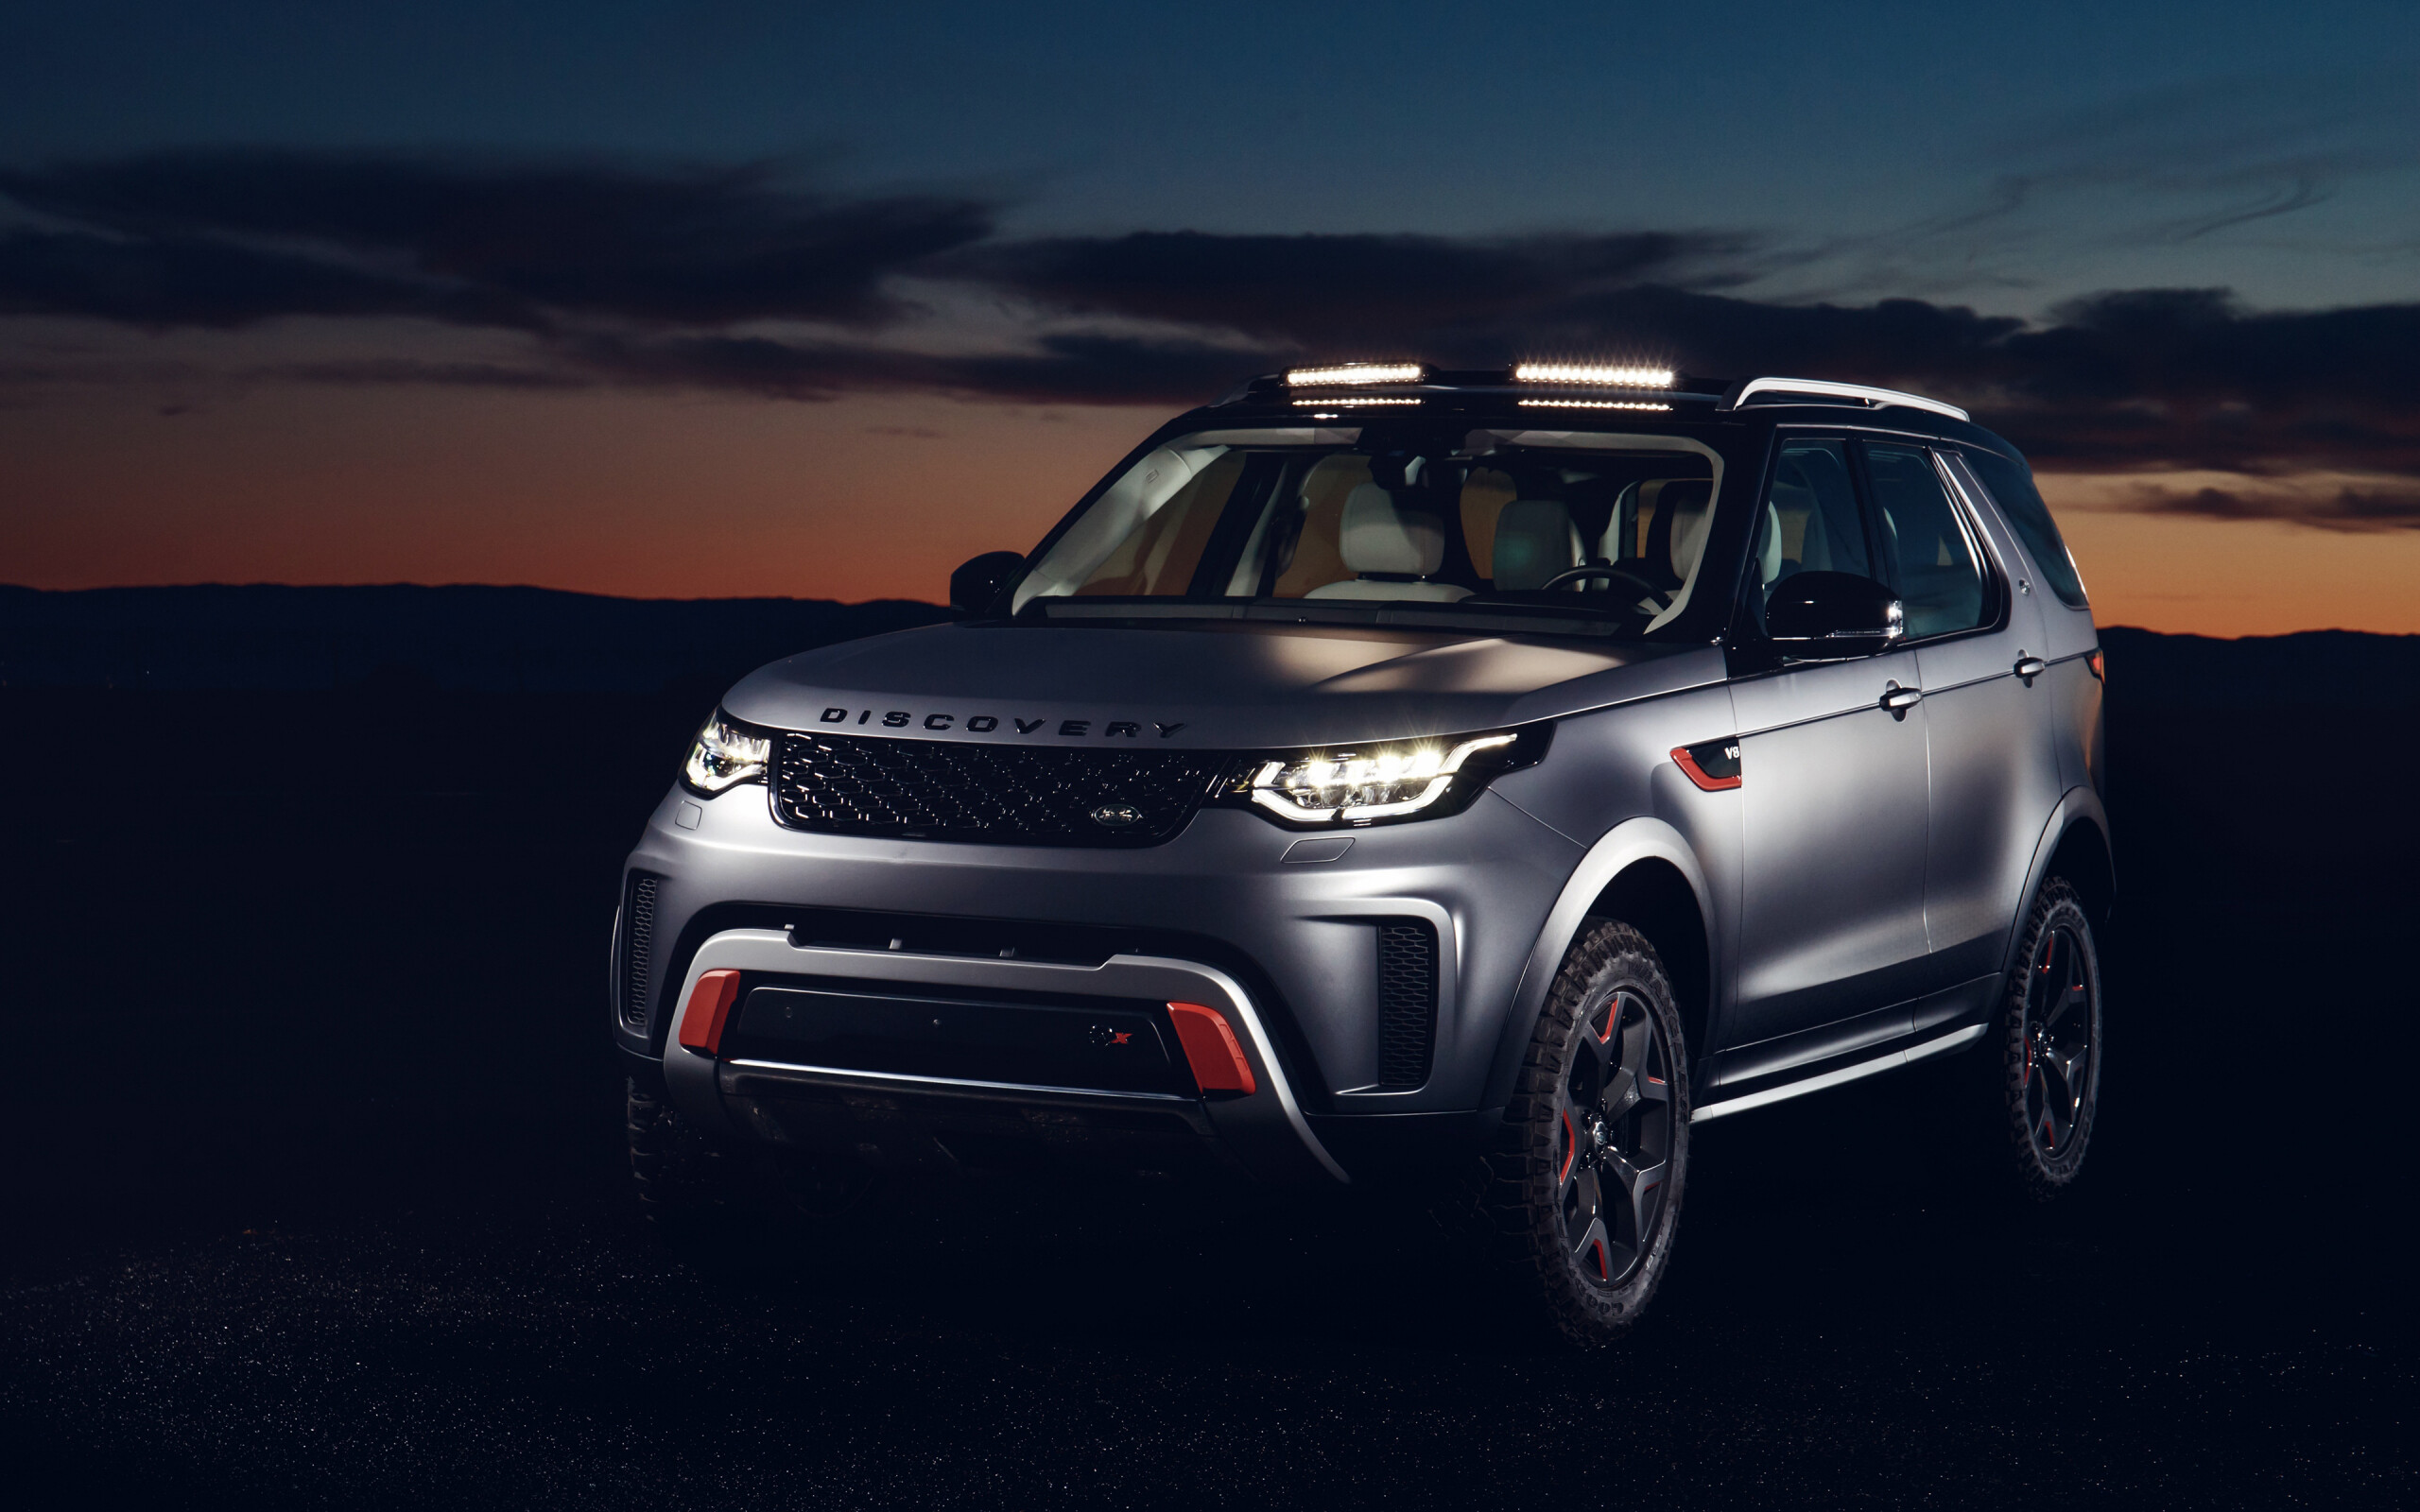 Land Rover: 2018 Discovery SVX, SUV car, Mid-size luxury crossover. 2560x1600 HD Background.